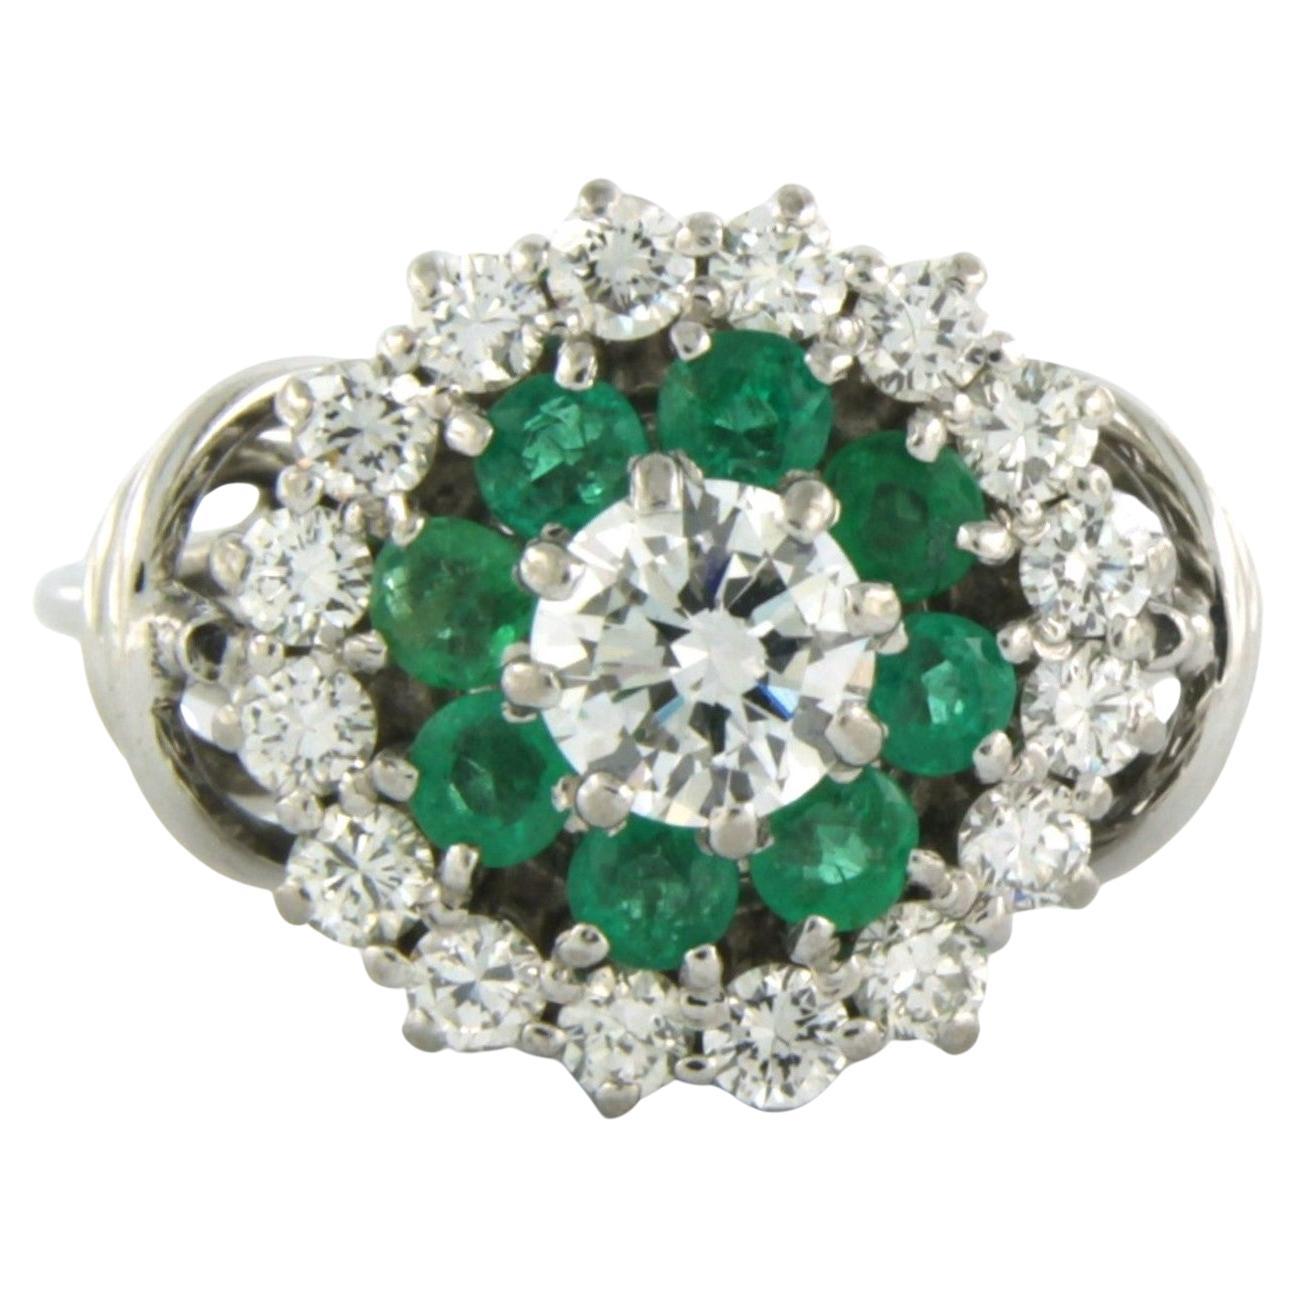 Ring with emerald and diamonds 18k white gold